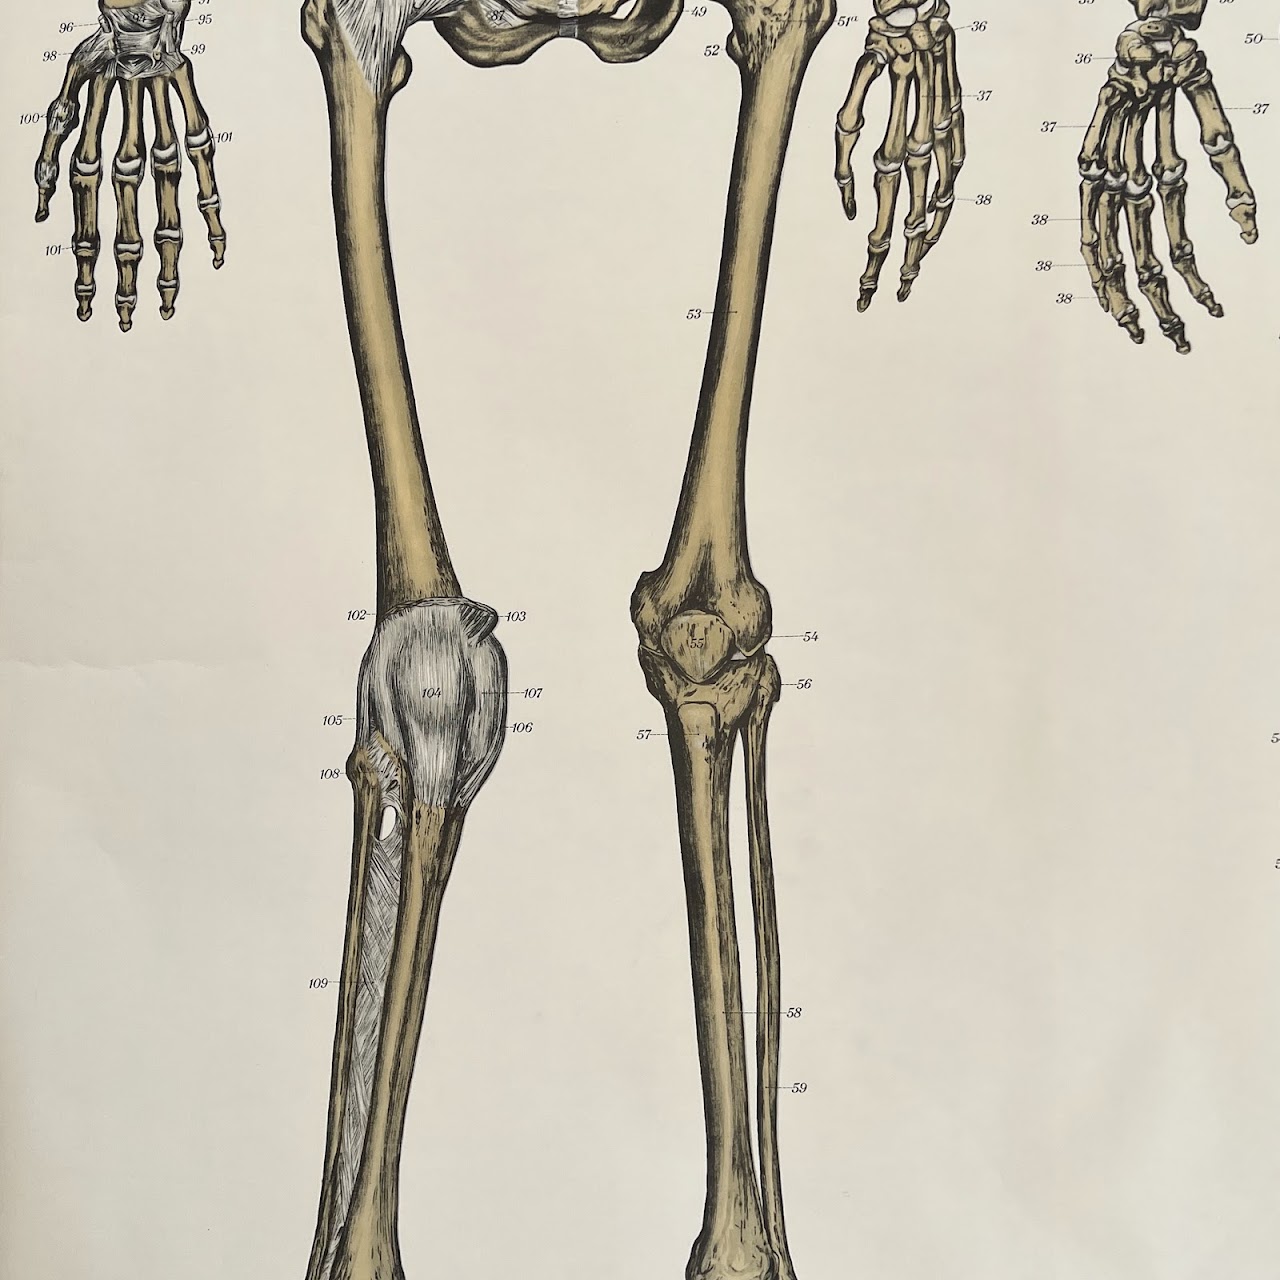 American Frohse Max Brodel Skeletal System Anatomy Chart, 1918